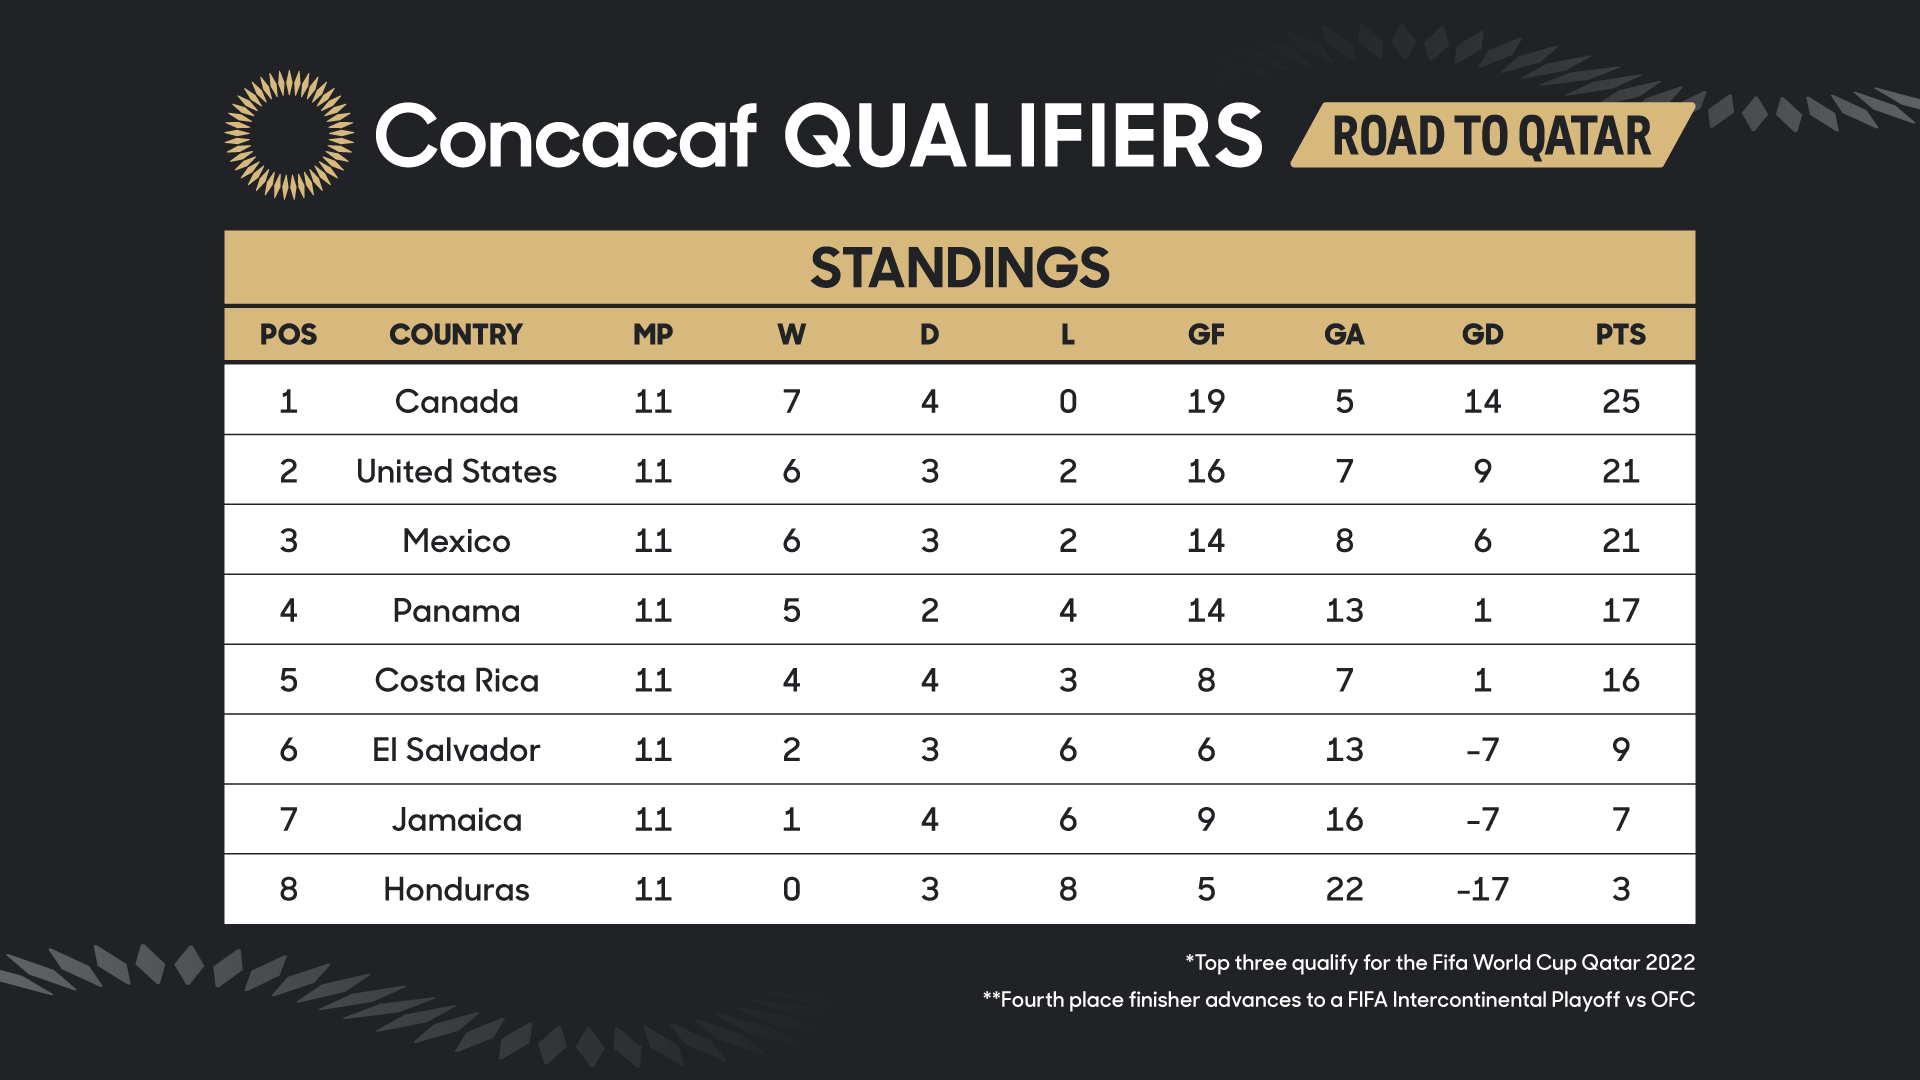 Concacaf confirms times, venues for final slate of World Cup Qualifying matches